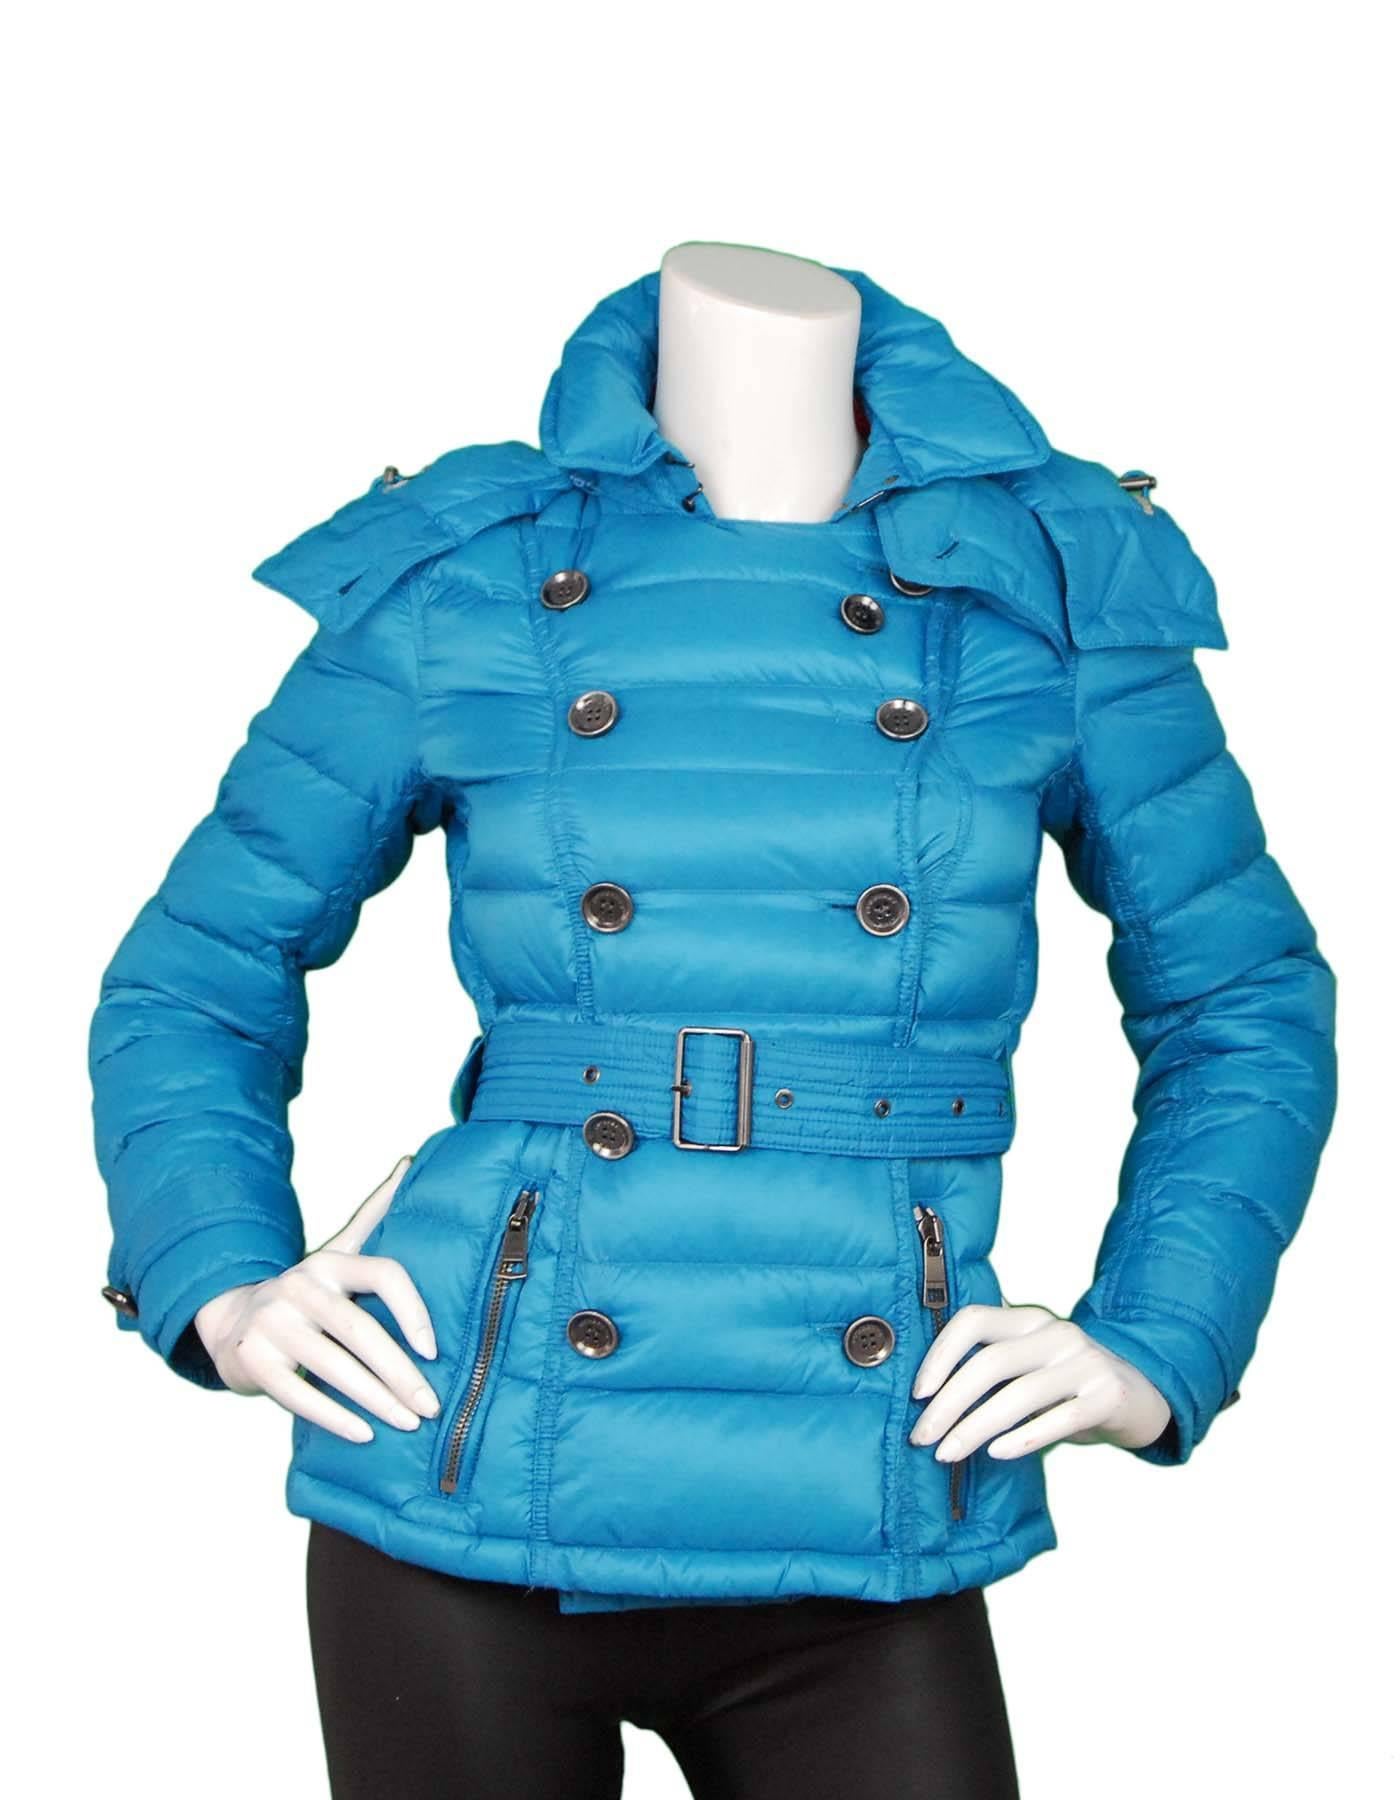 Burberry Brit Turquoise Puffer Jacket Sz S
Features optional hood and belt at waist

Made In: China
Color: Turquoise
Composition: 100% Nylon
Filling: 85% White goose down cluster, 15% White goose feather
Lining: Blue nylon
Closure/Opening: